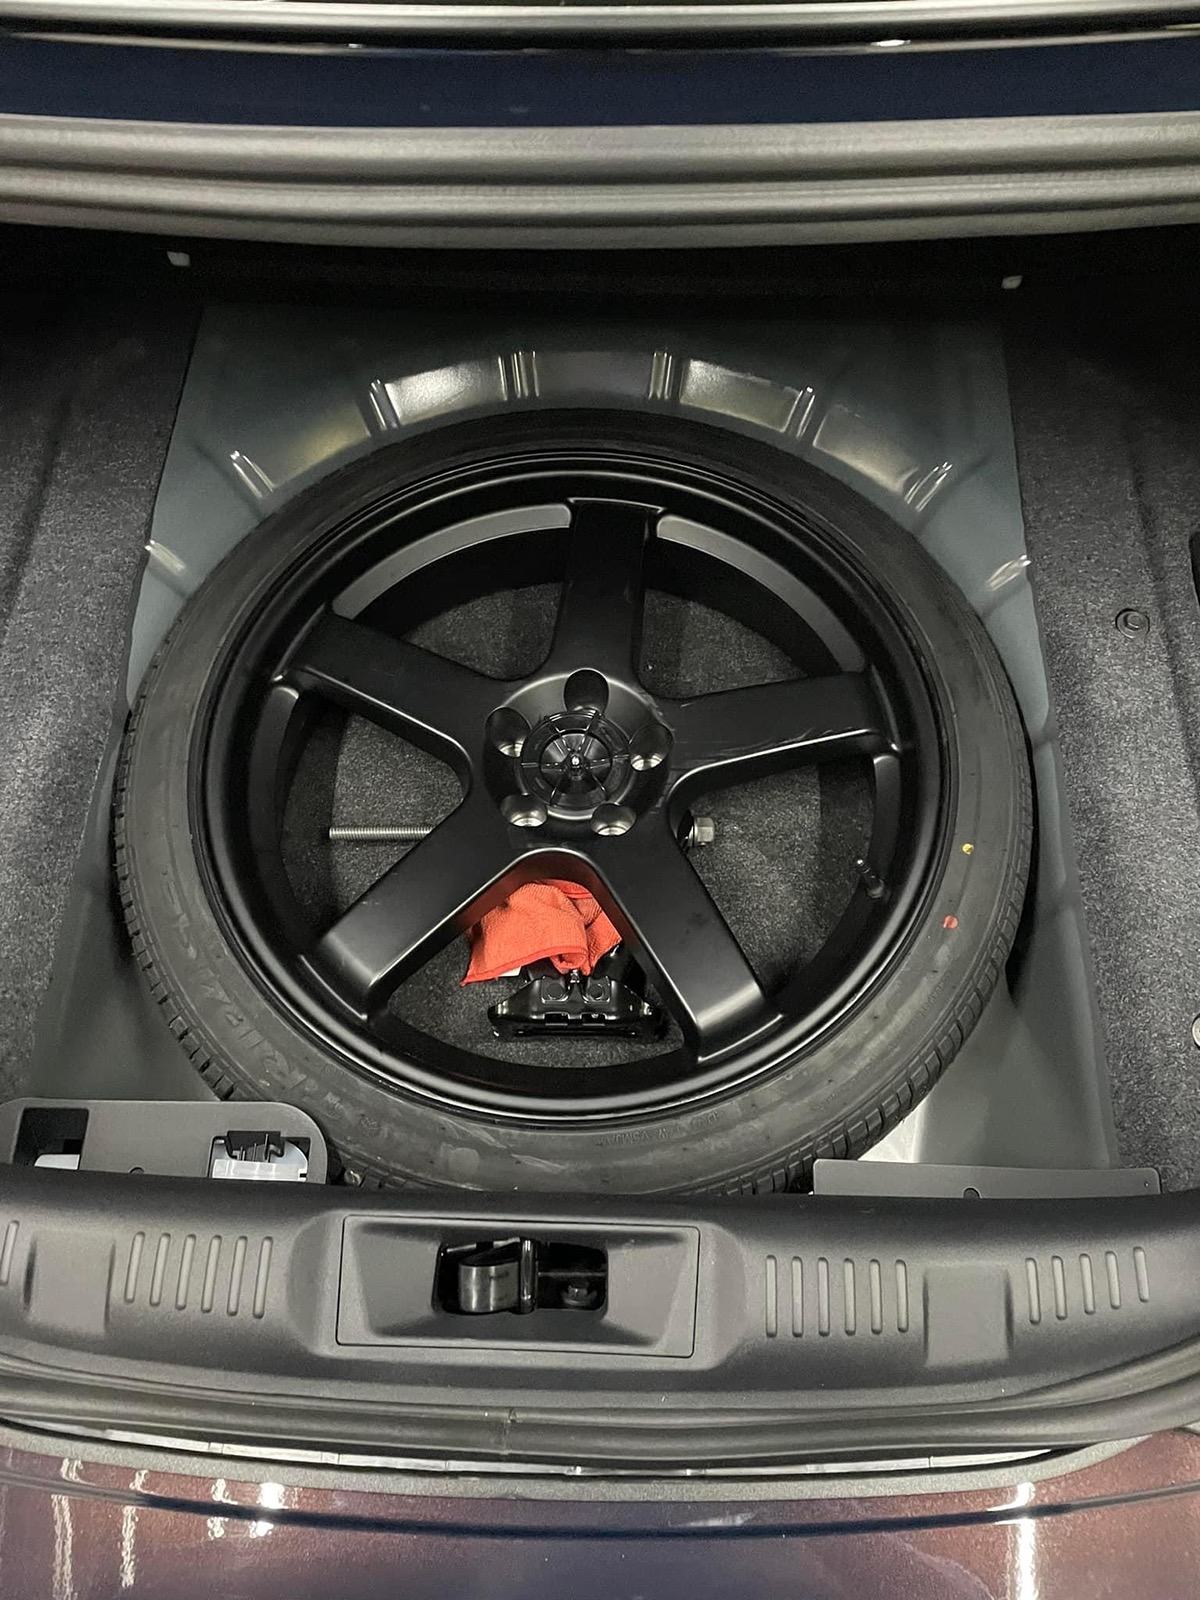 S650 Mustang Spare wheel/tire (solved…big thank you to everyone) IMG_5040